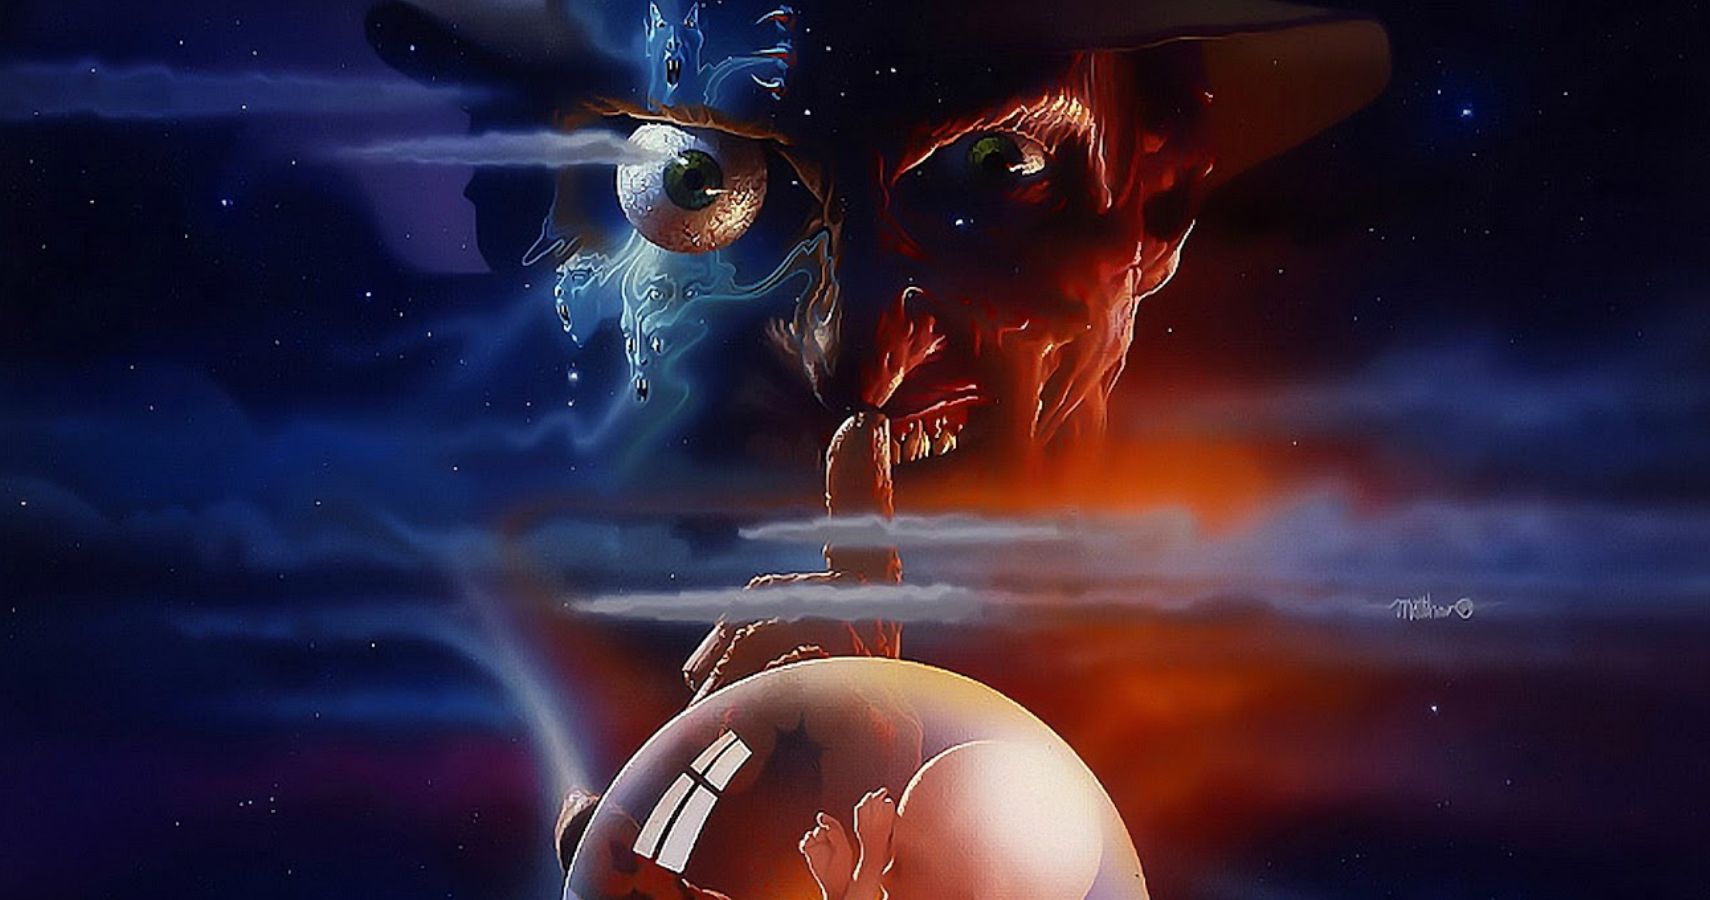 A Nightmare on Elm Street 5 The Dream Child Cropped Poster